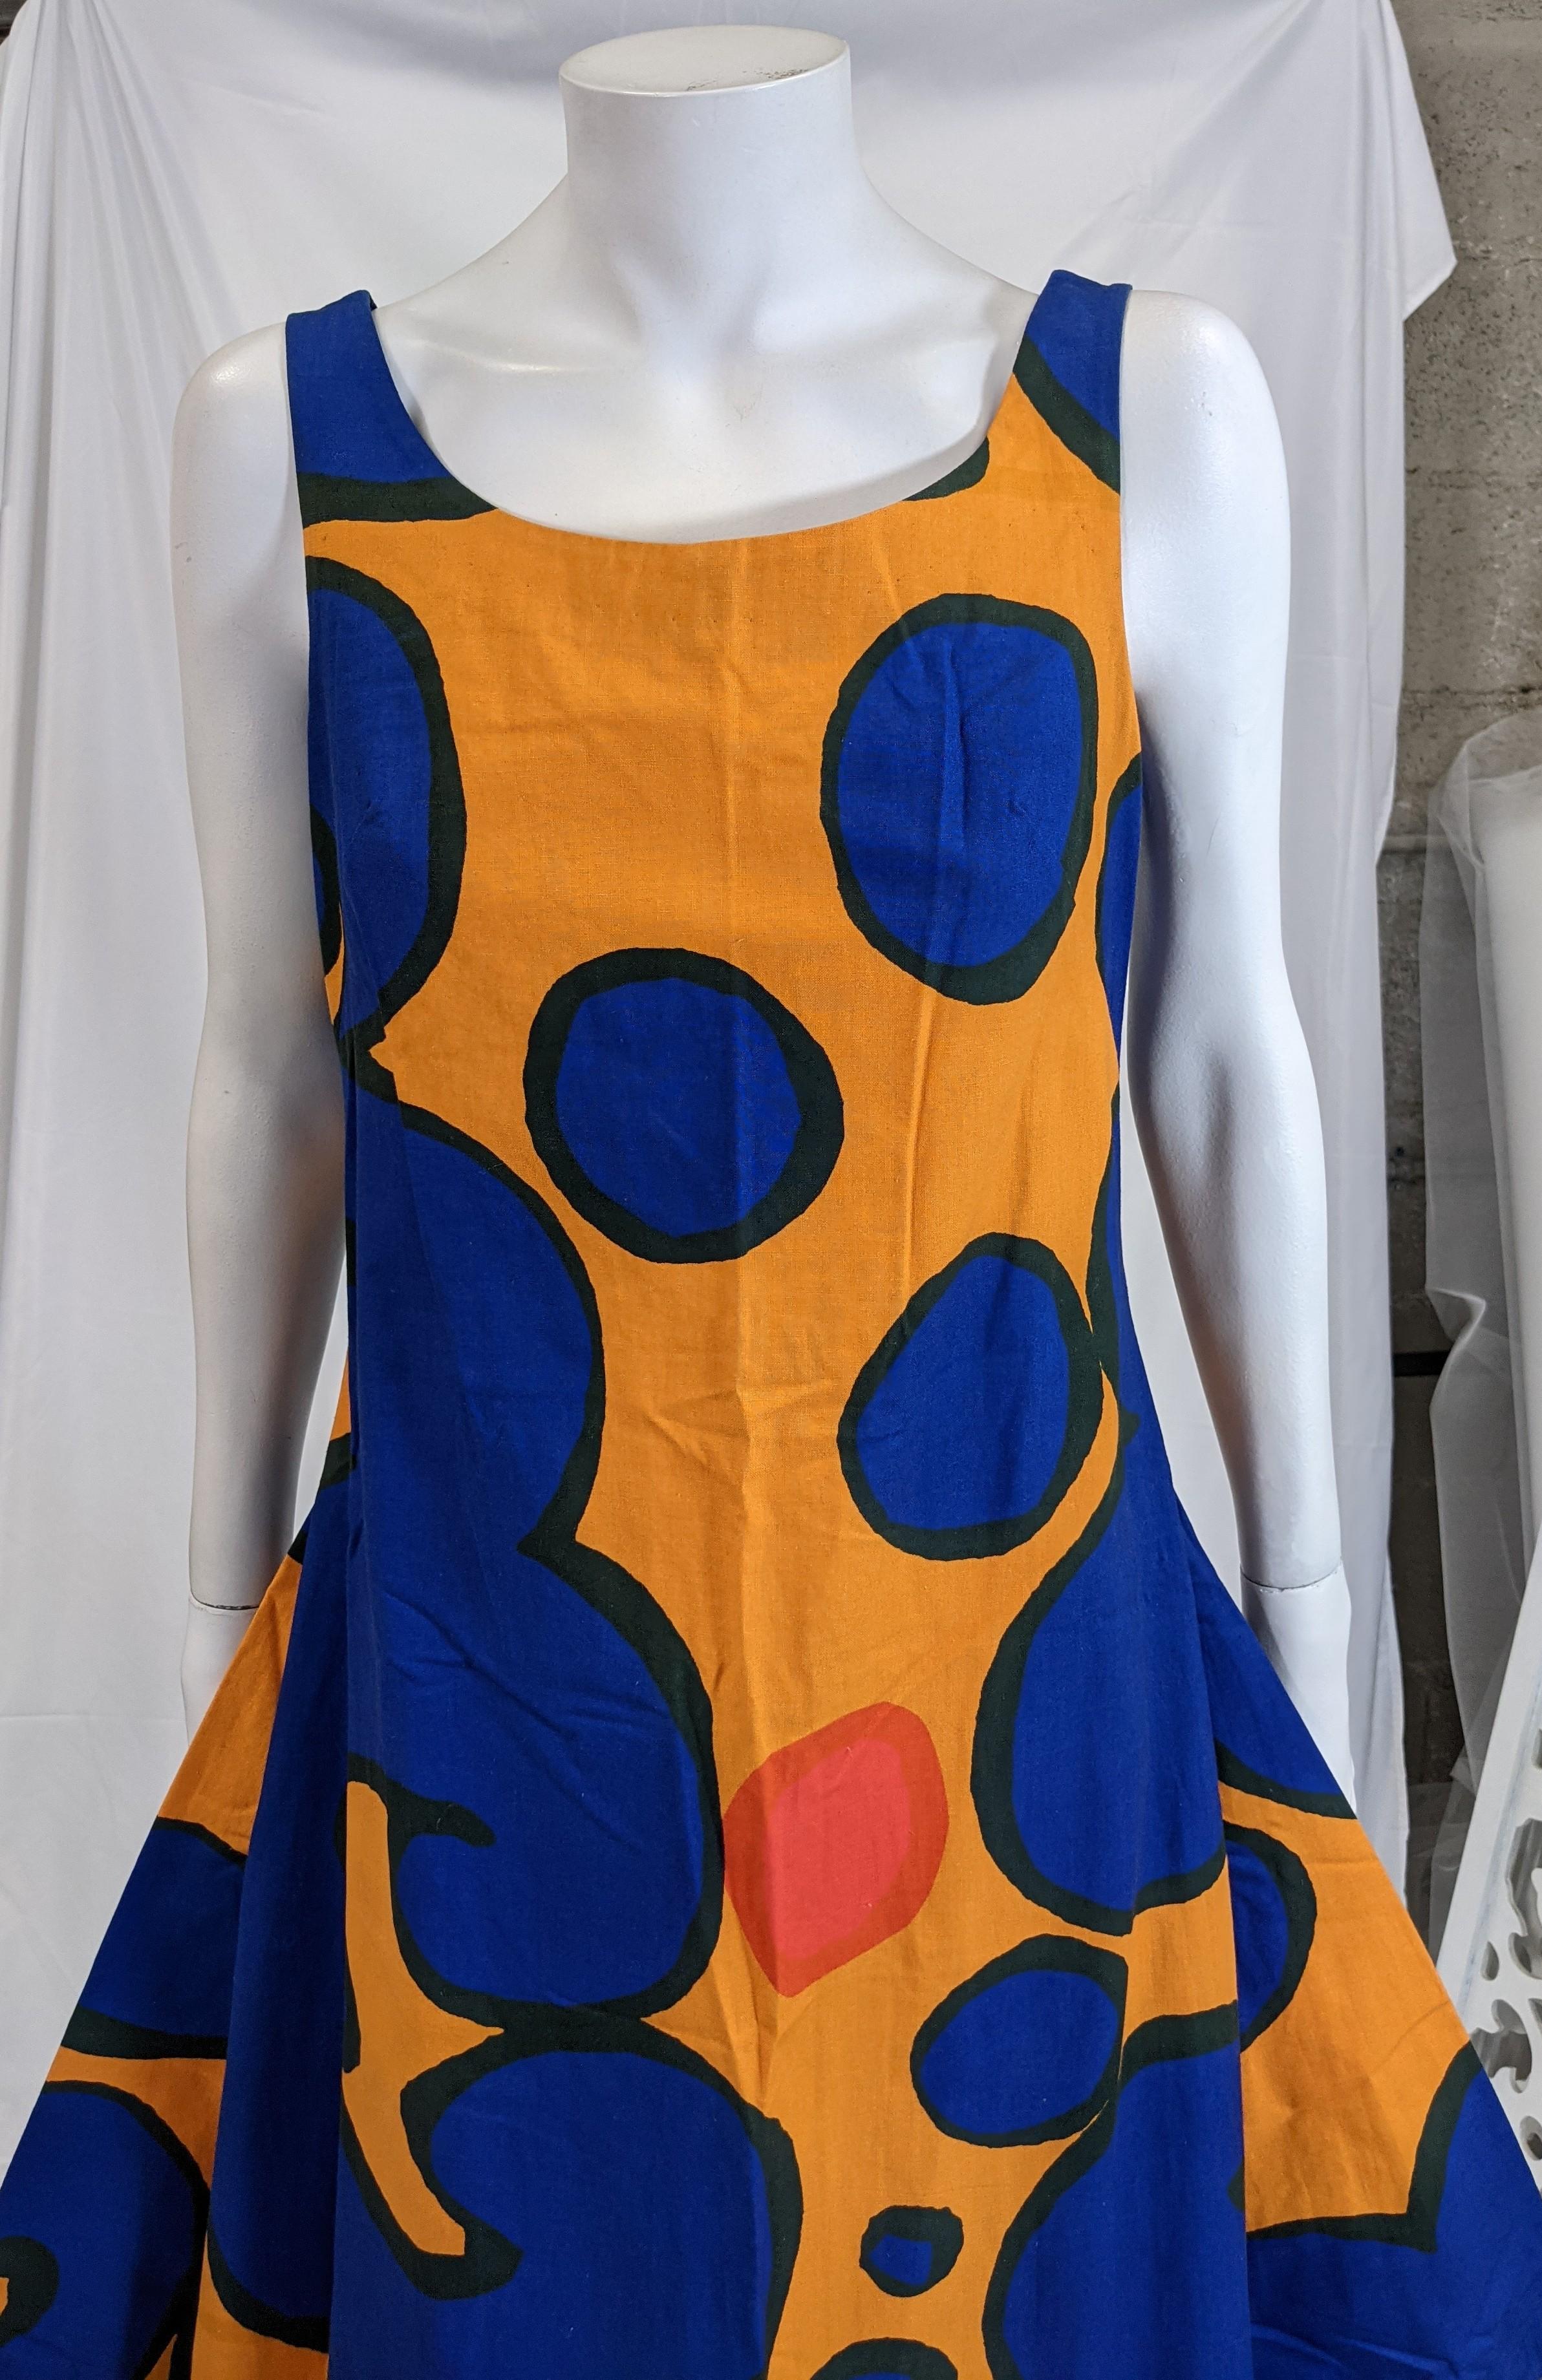 Unusual and striking  Marimekko Cotton Print Curved Hem Dress from the 1980s made in a crisp canvas with brightly colored abstracts with an unusual cut. The dress slips over the head with no closures and has long circular cut hem at front and back.